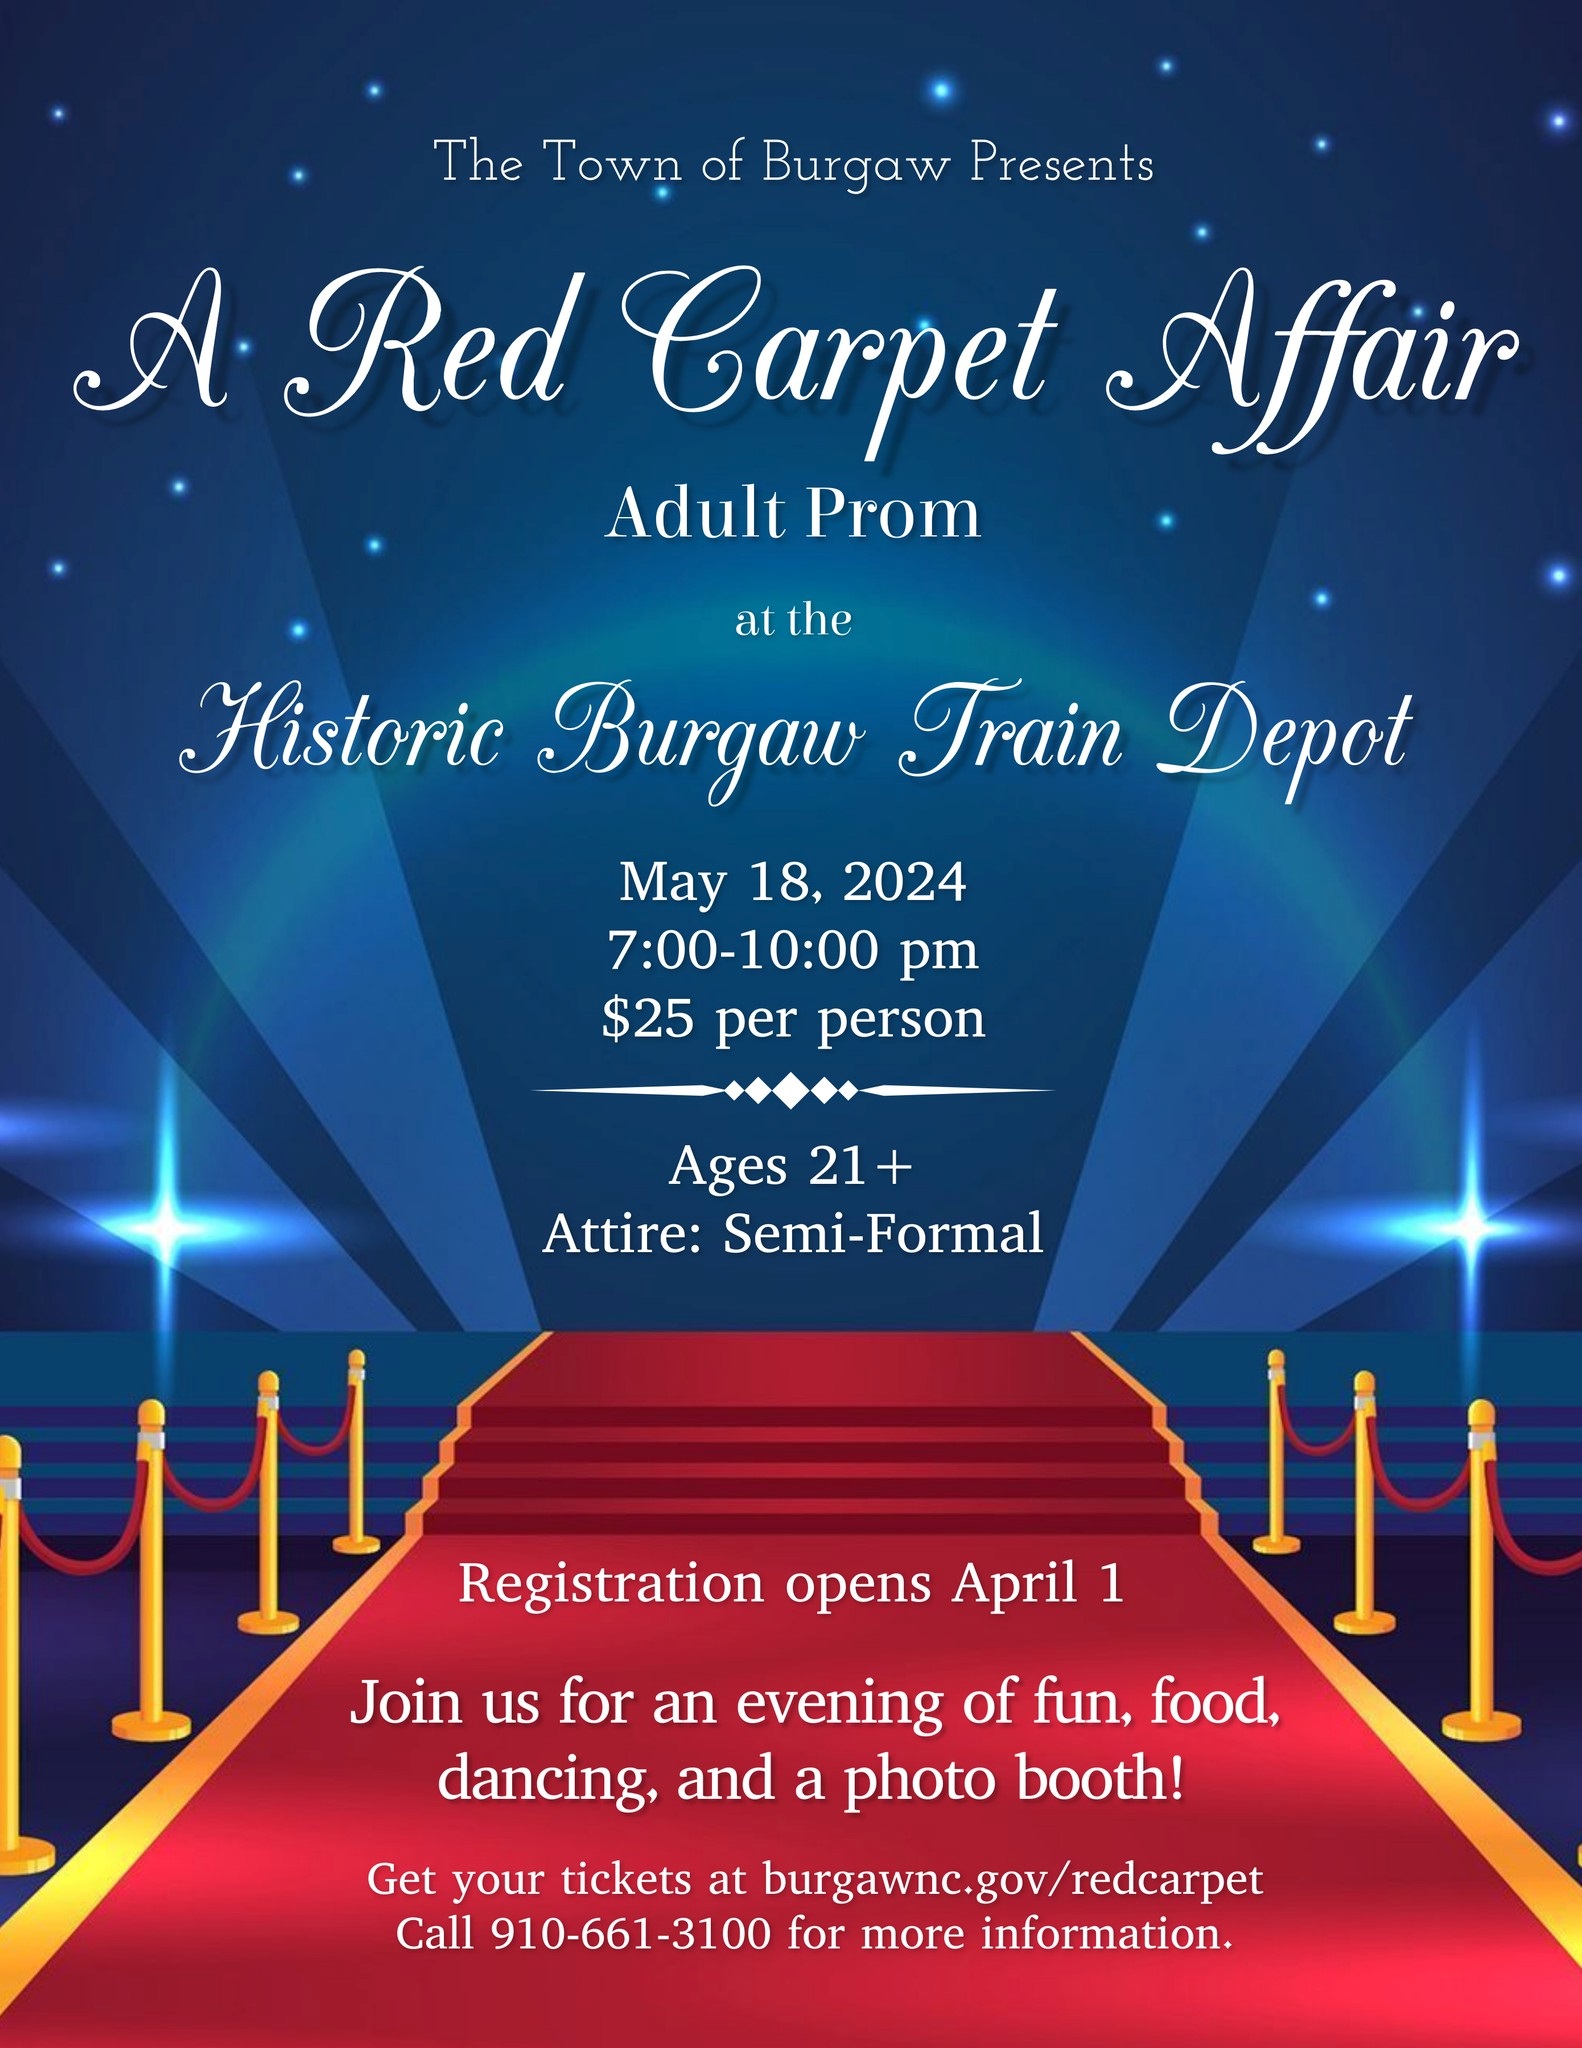 A Red Carpet Affair - Adult Prom